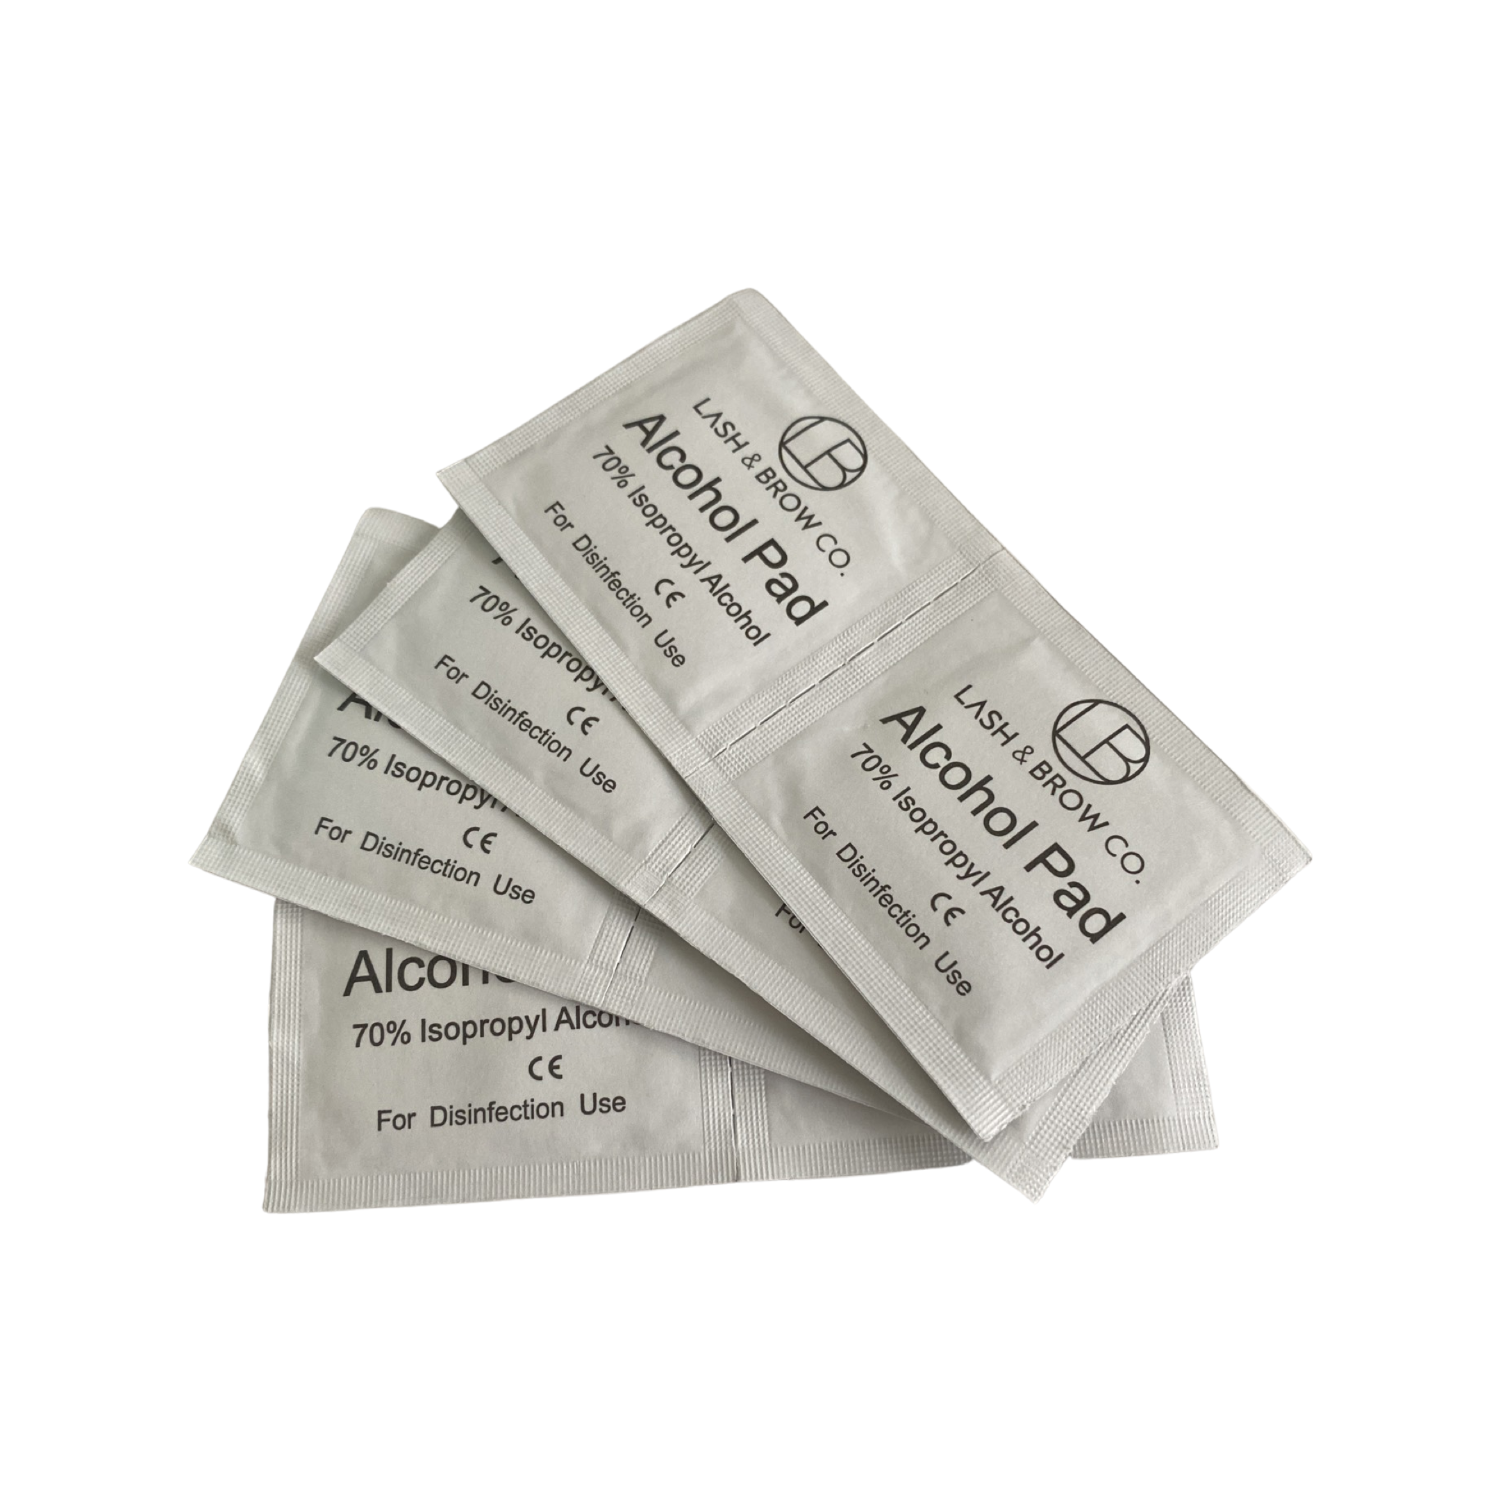 ALCOHOL WIPES